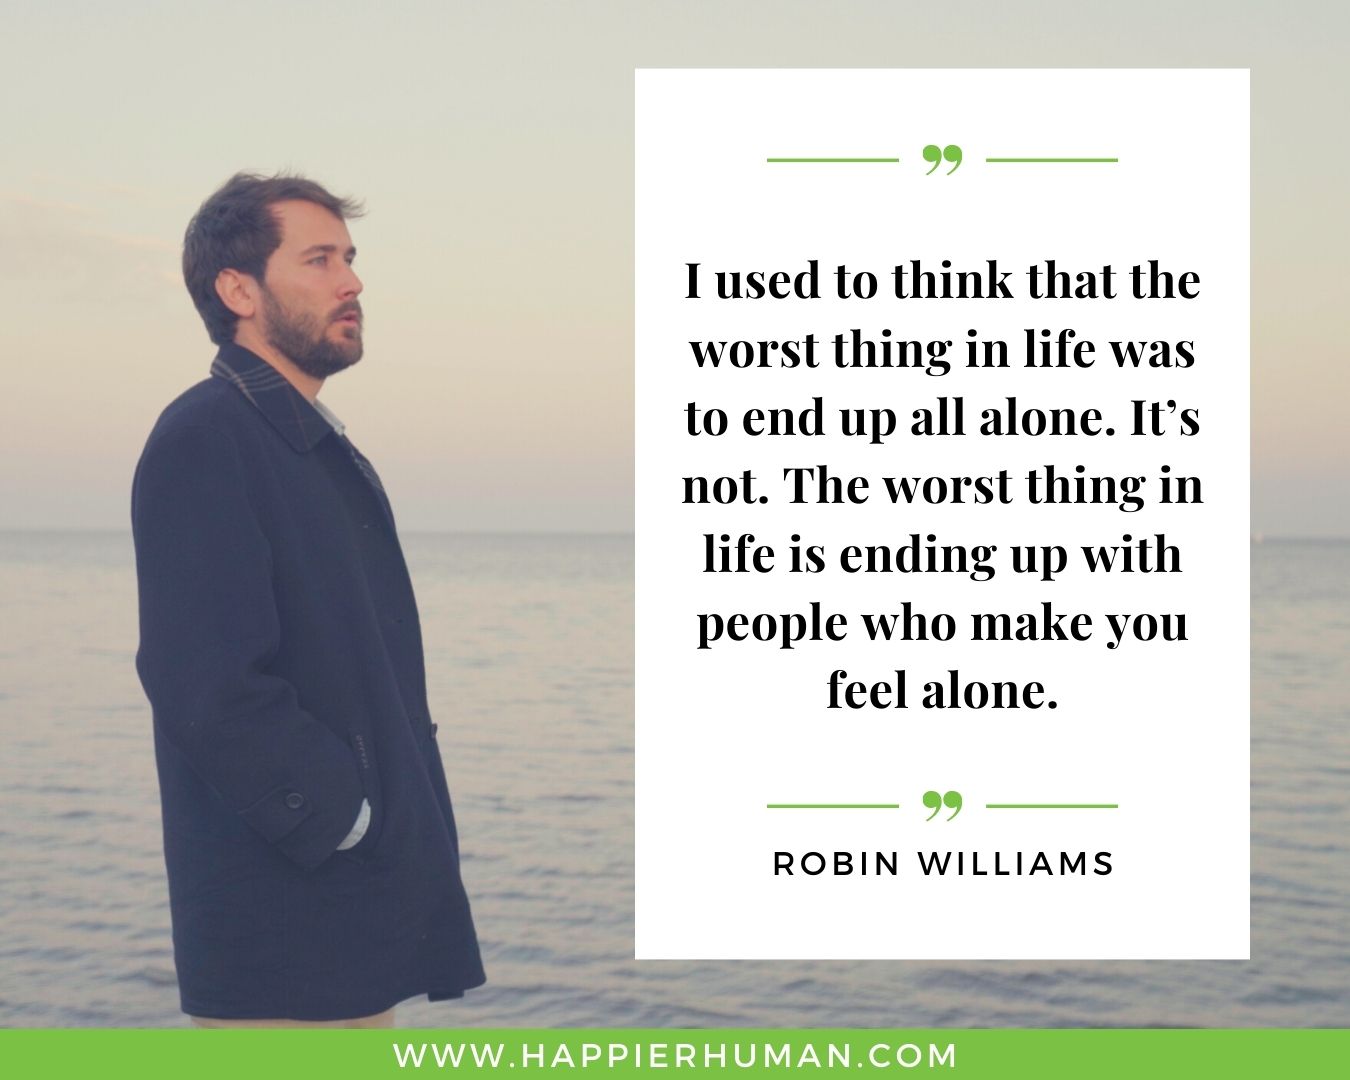 Loneliness Quotes - “I used to think that the worst thing in life was to end up all alone. It’s not. The worst thing in life is ending up with people who make you feel alone.”– Robin Williams